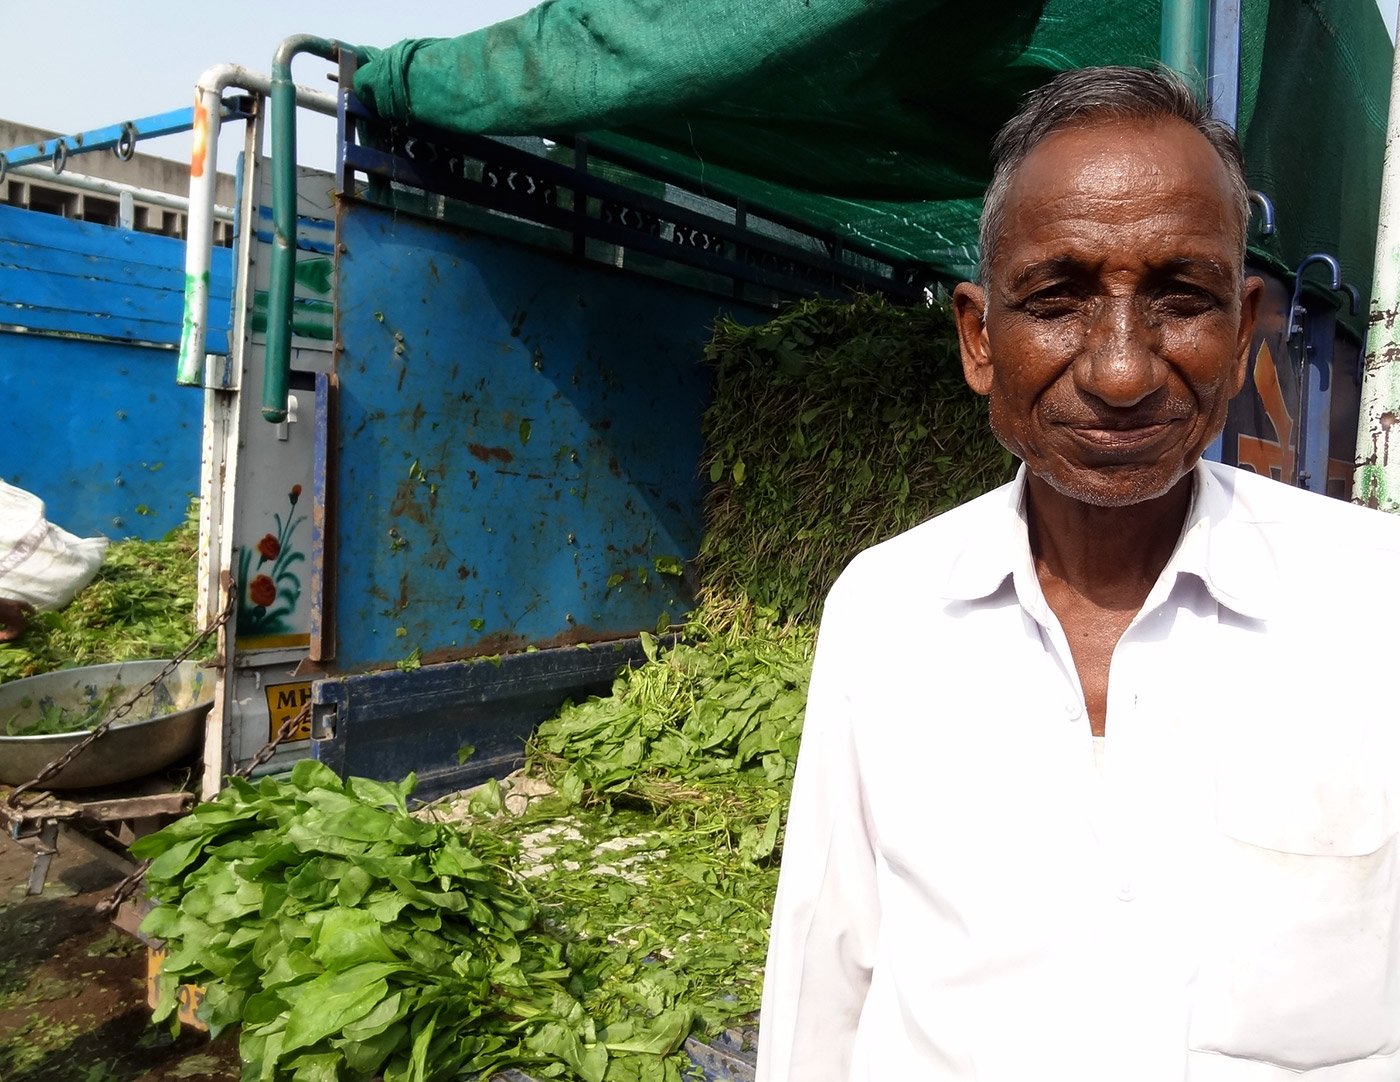 Chandrabhan Jhode with his spinach crop at the Nagpur APMC: a good monsoon had led to a good harvest this year and the farmers were hoping for decent returns after successive years of drought in many regions of the country